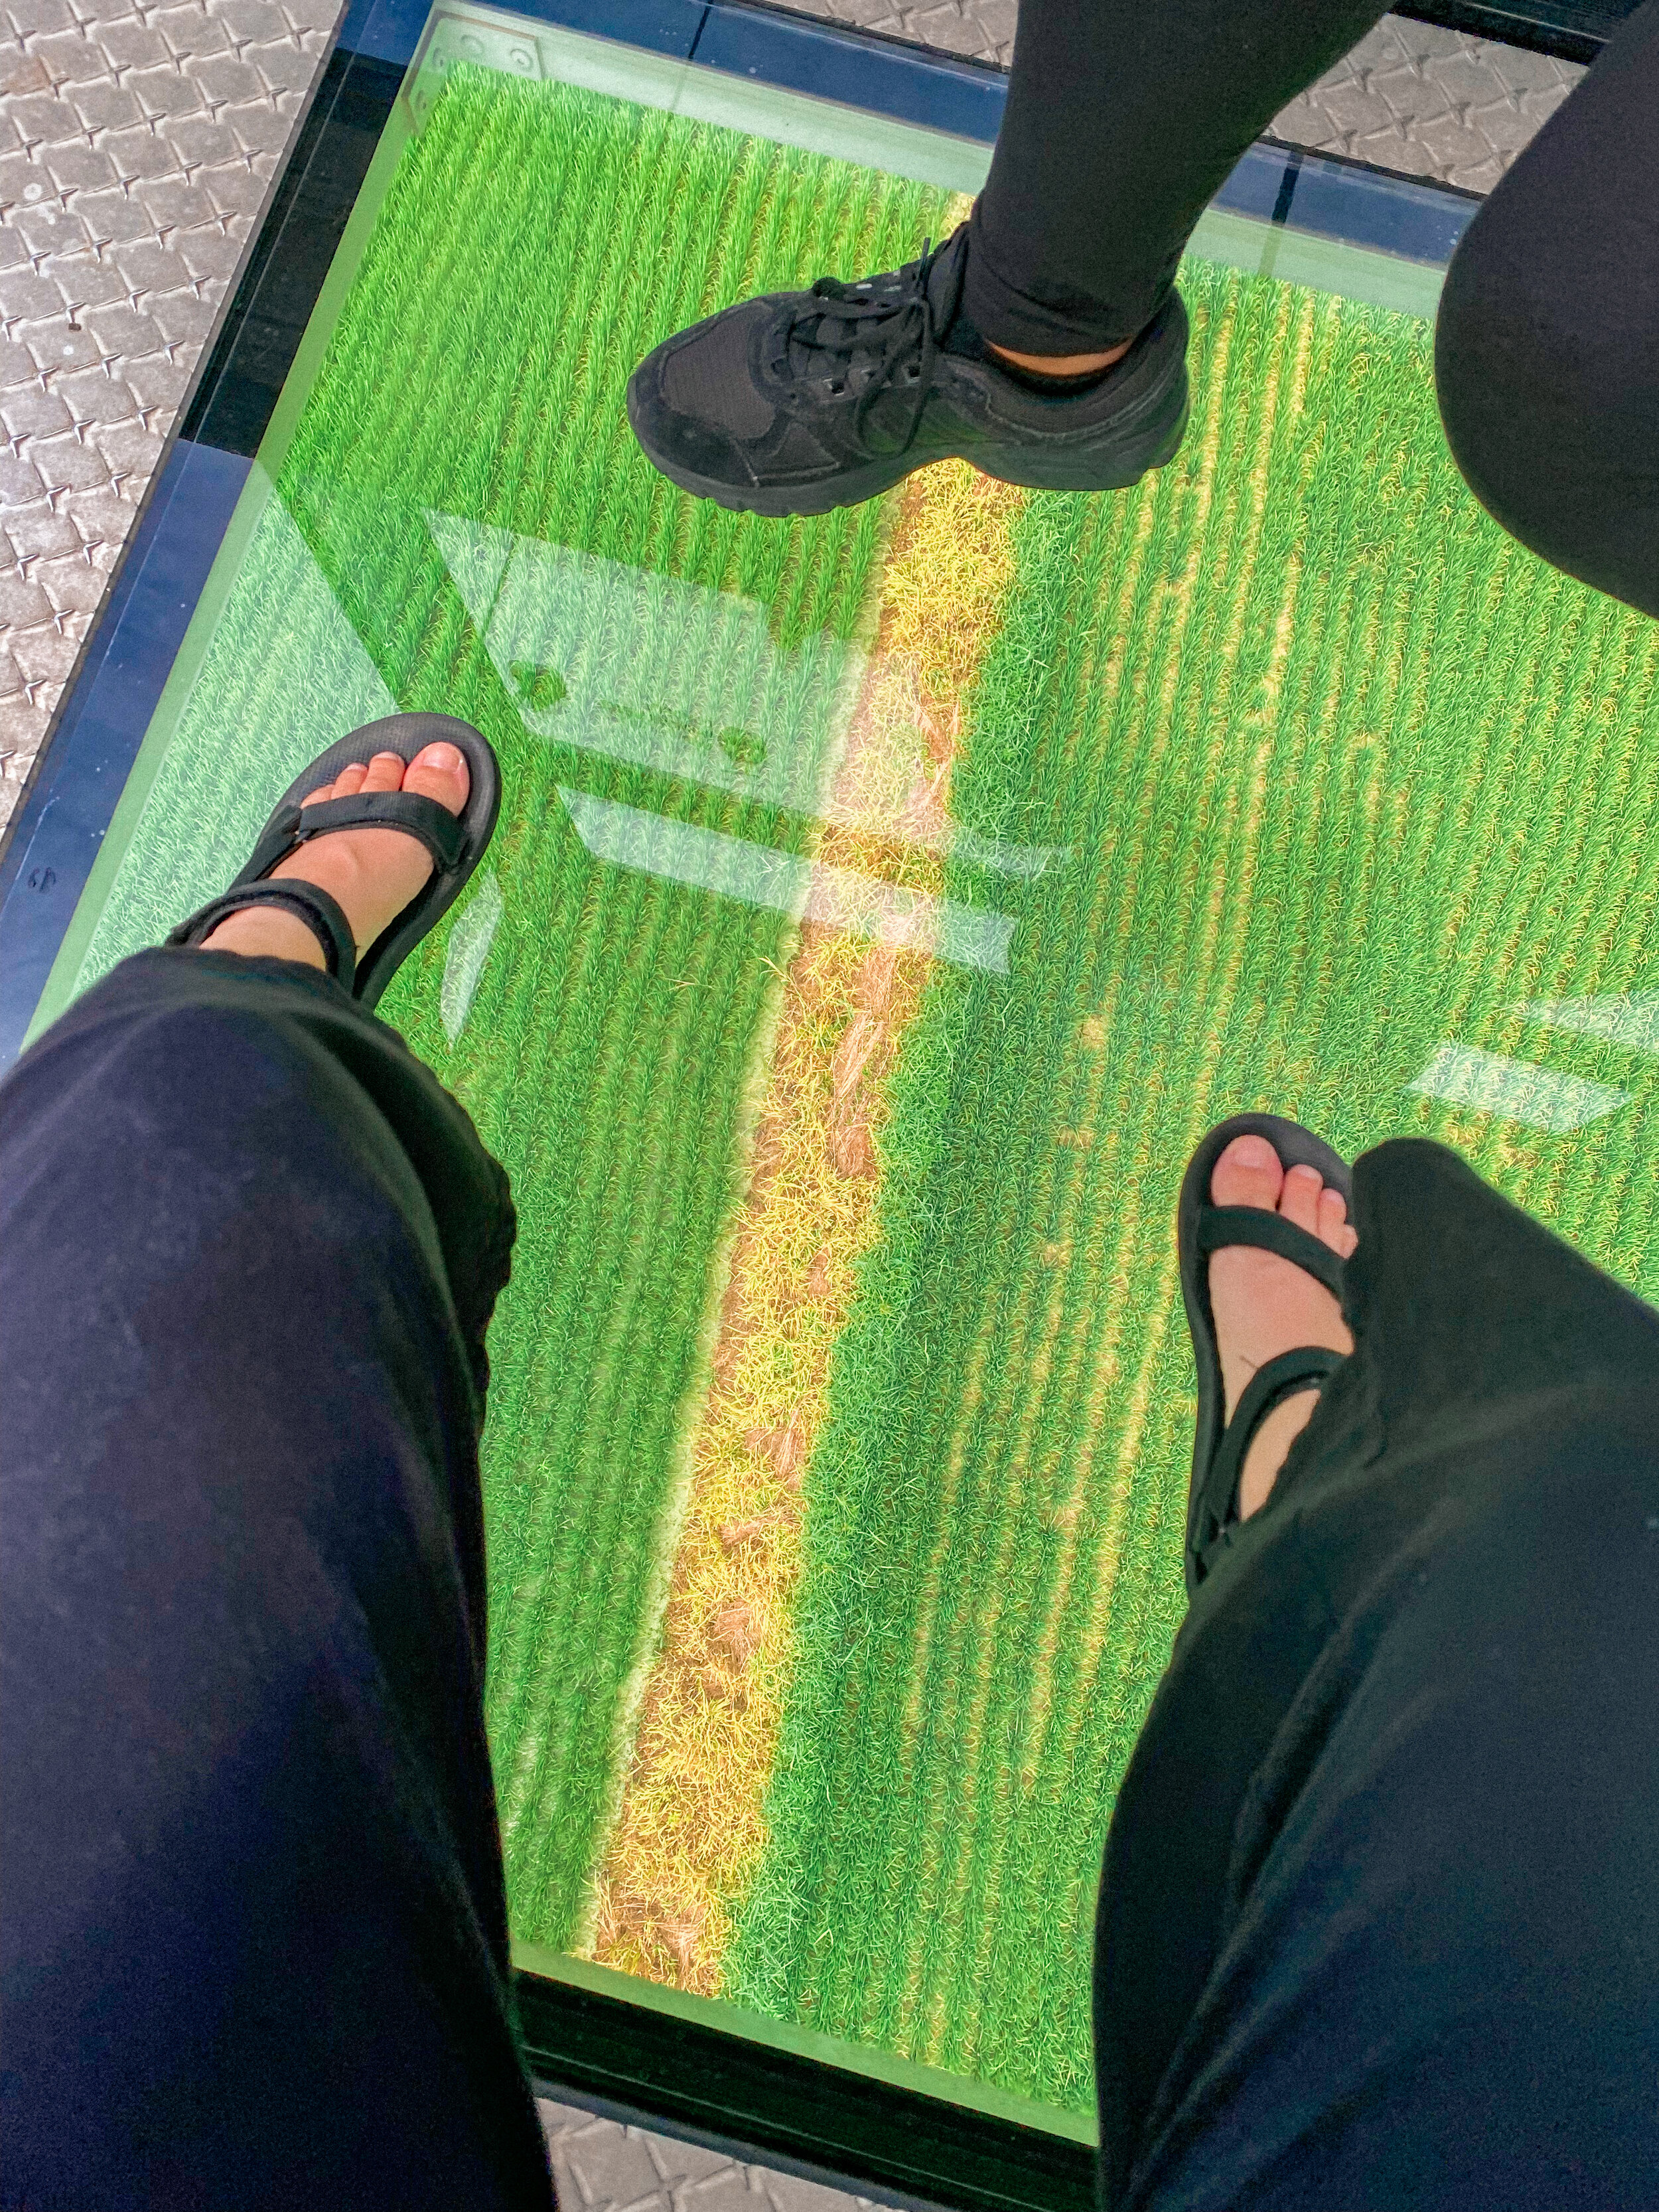 giving the internet a free feet pic; have i mentioned i hate glass bottom cable cars?